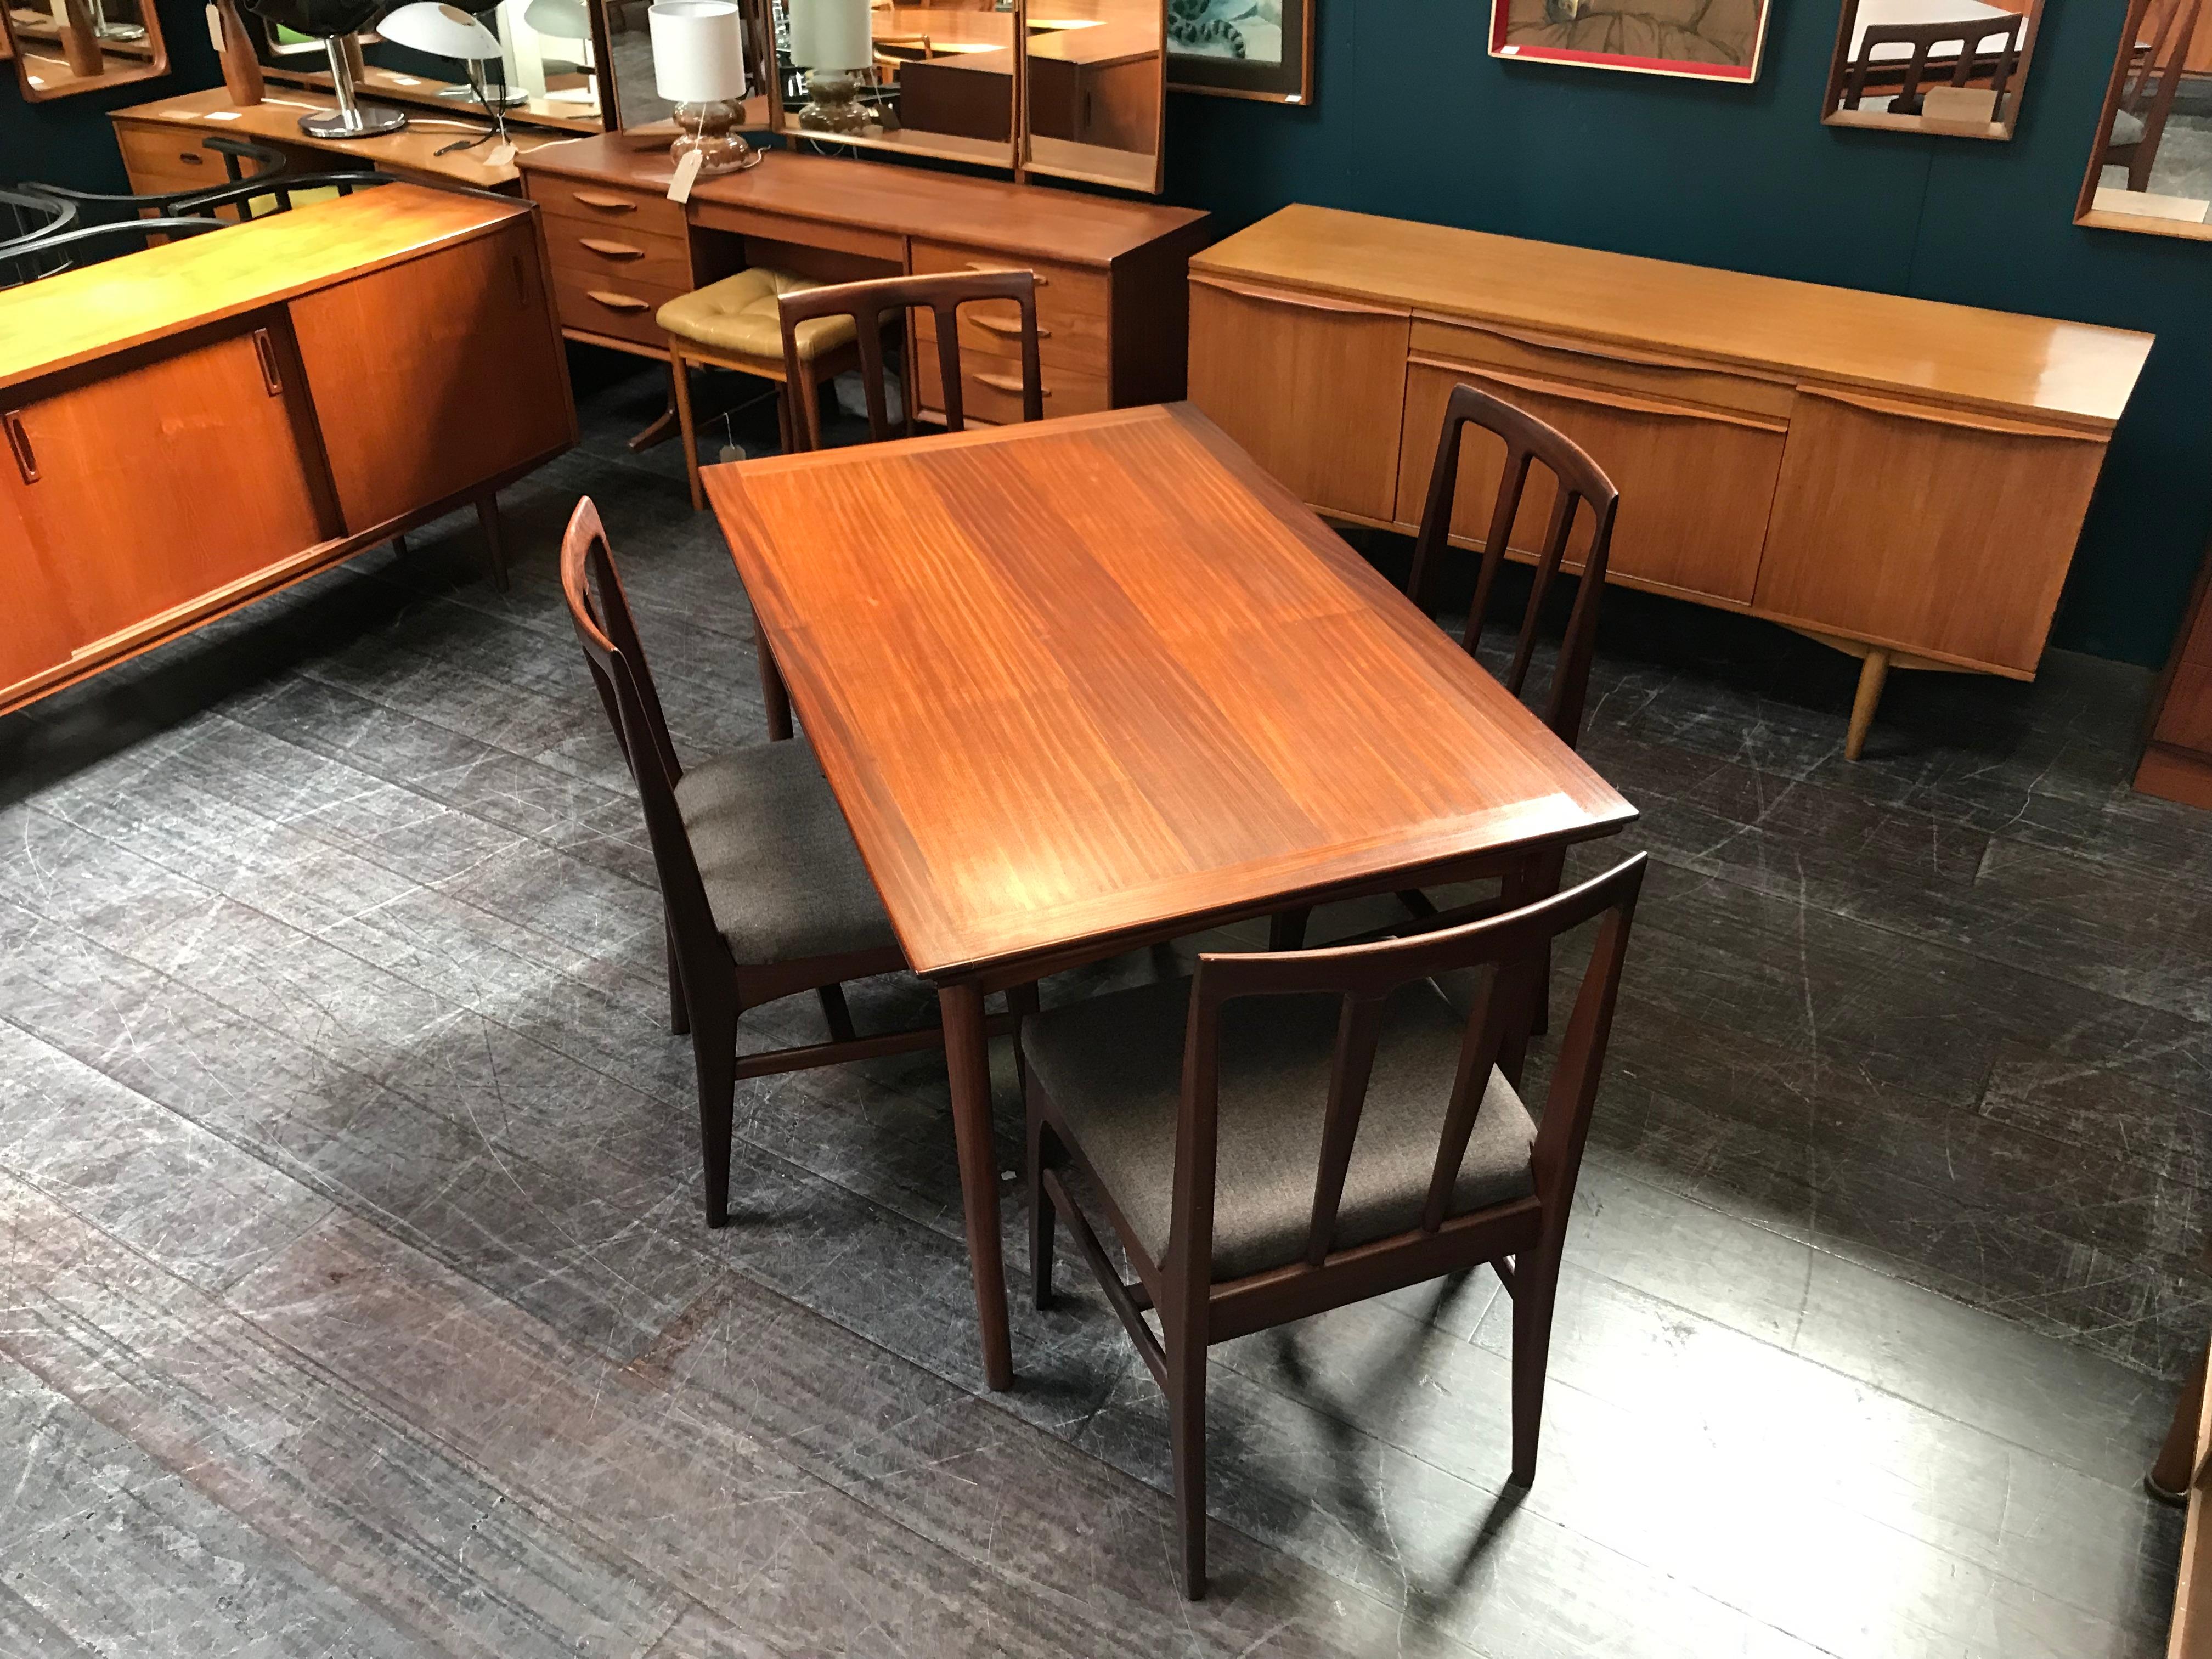 Scottish Extending Midcentury Afrormosia Dining Table with 4 Chairs by Younger of Glasgow For Sale